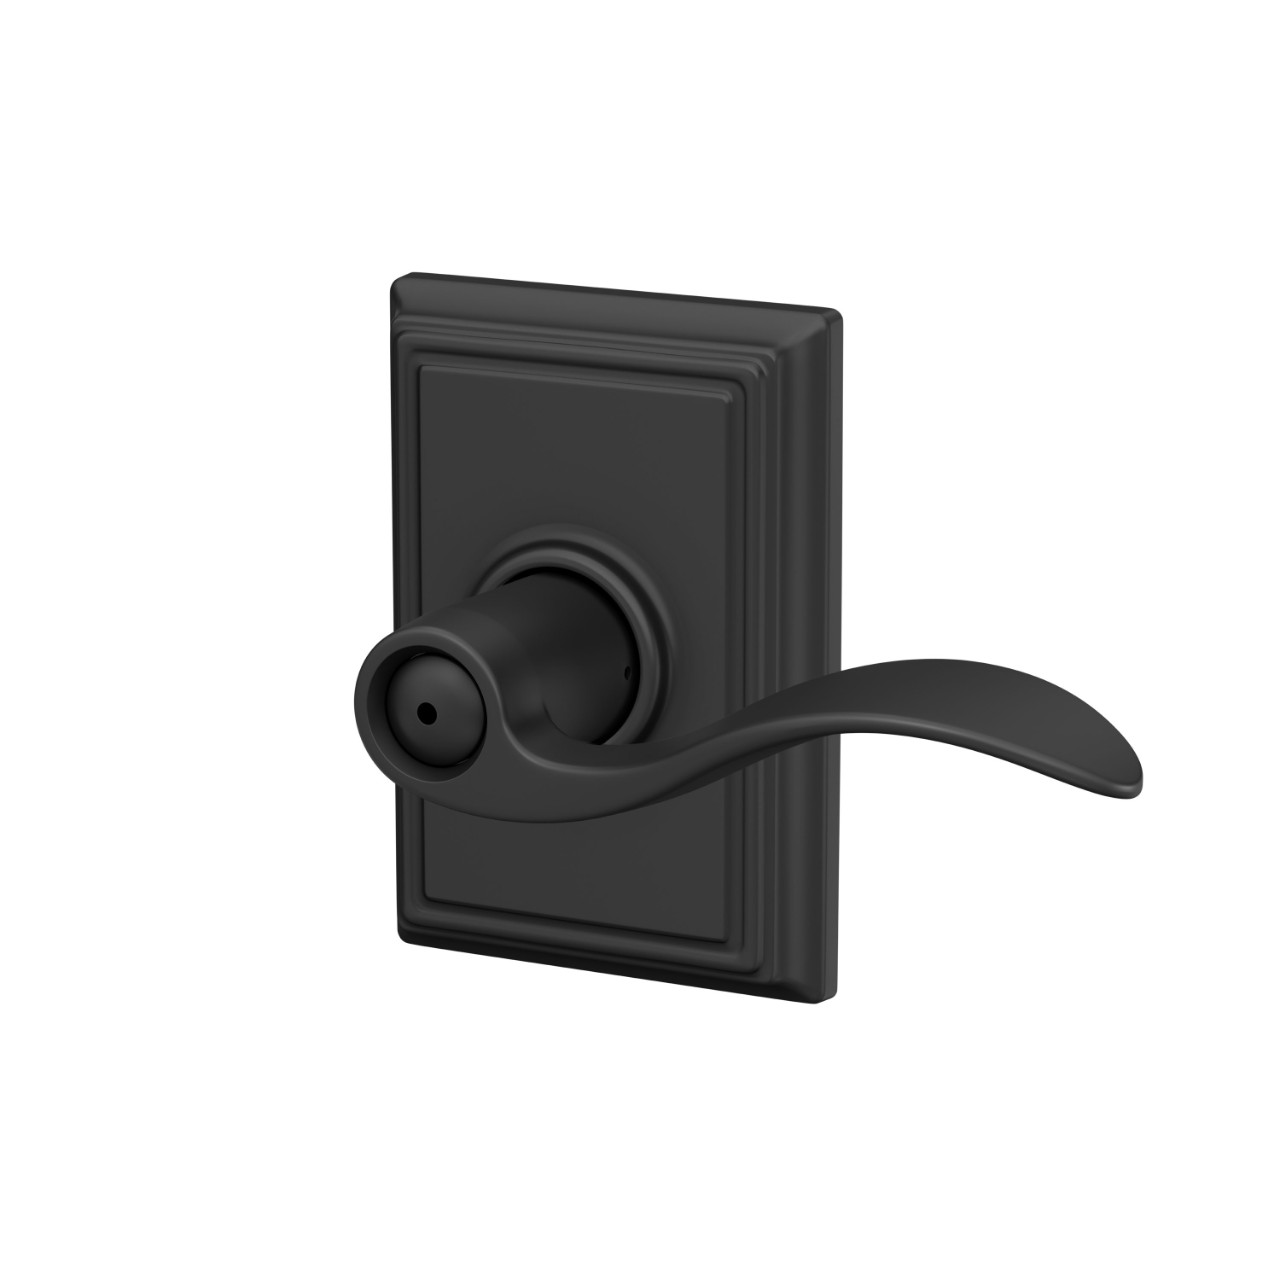 Accent Lever Bed & Bath Lock